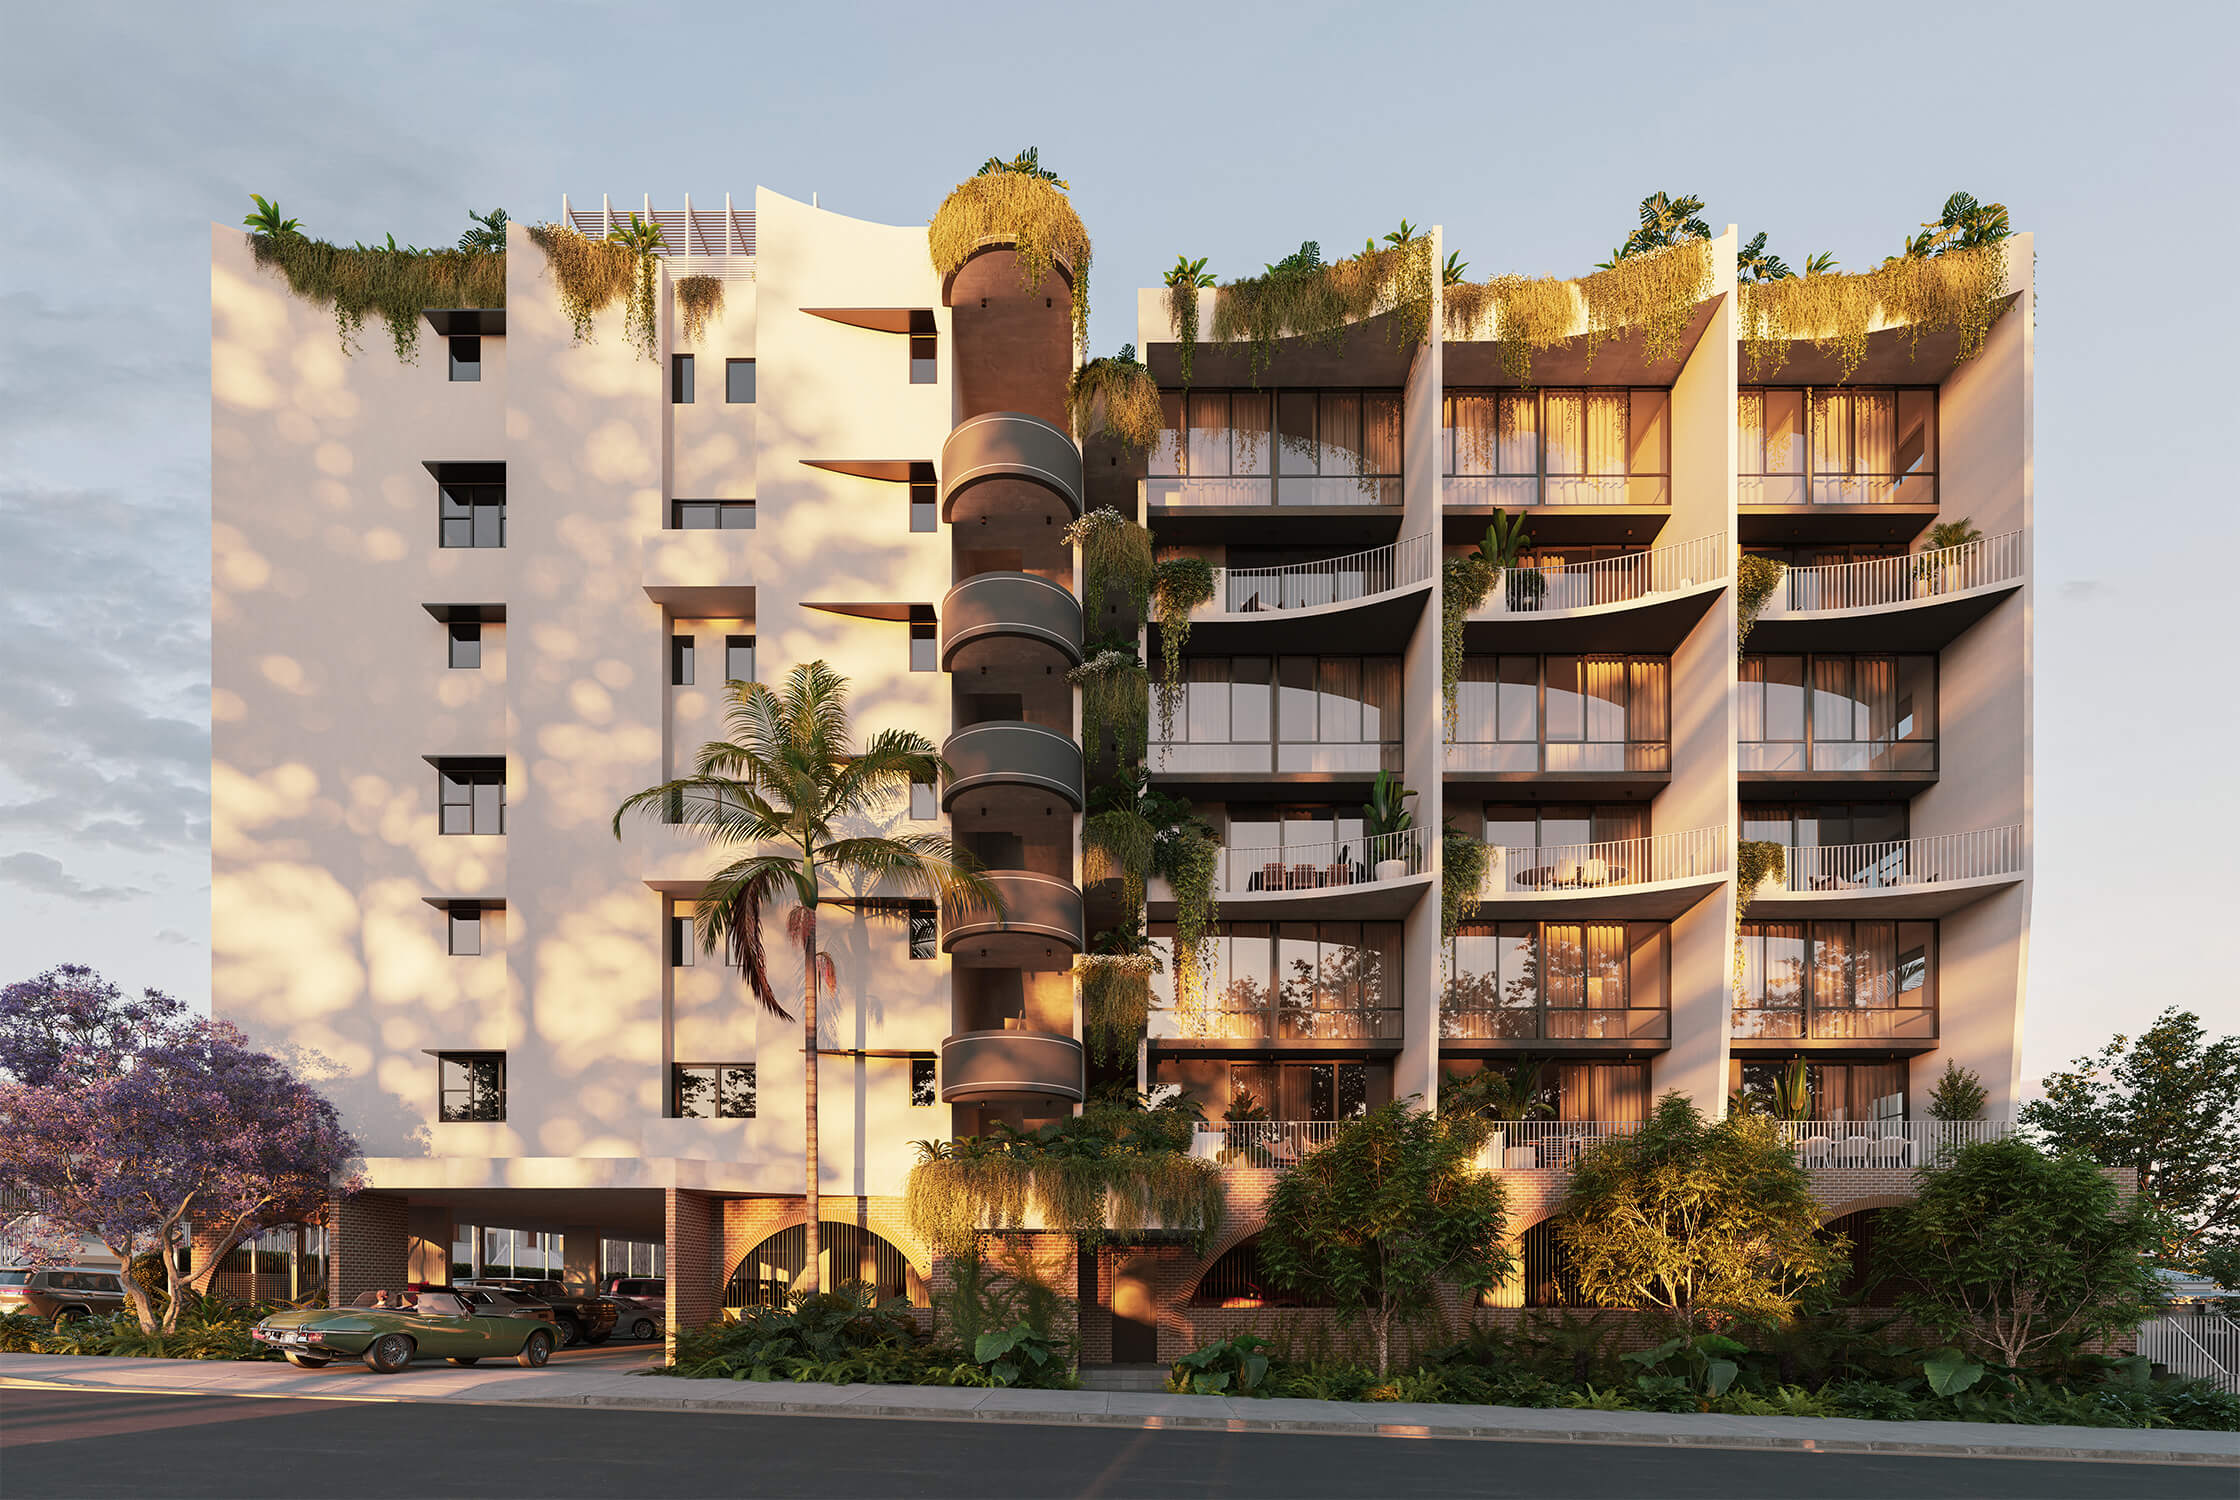 Hero exterior render of Atelier West End from Besant Street showing outdoor landscaping and cruved balconies.